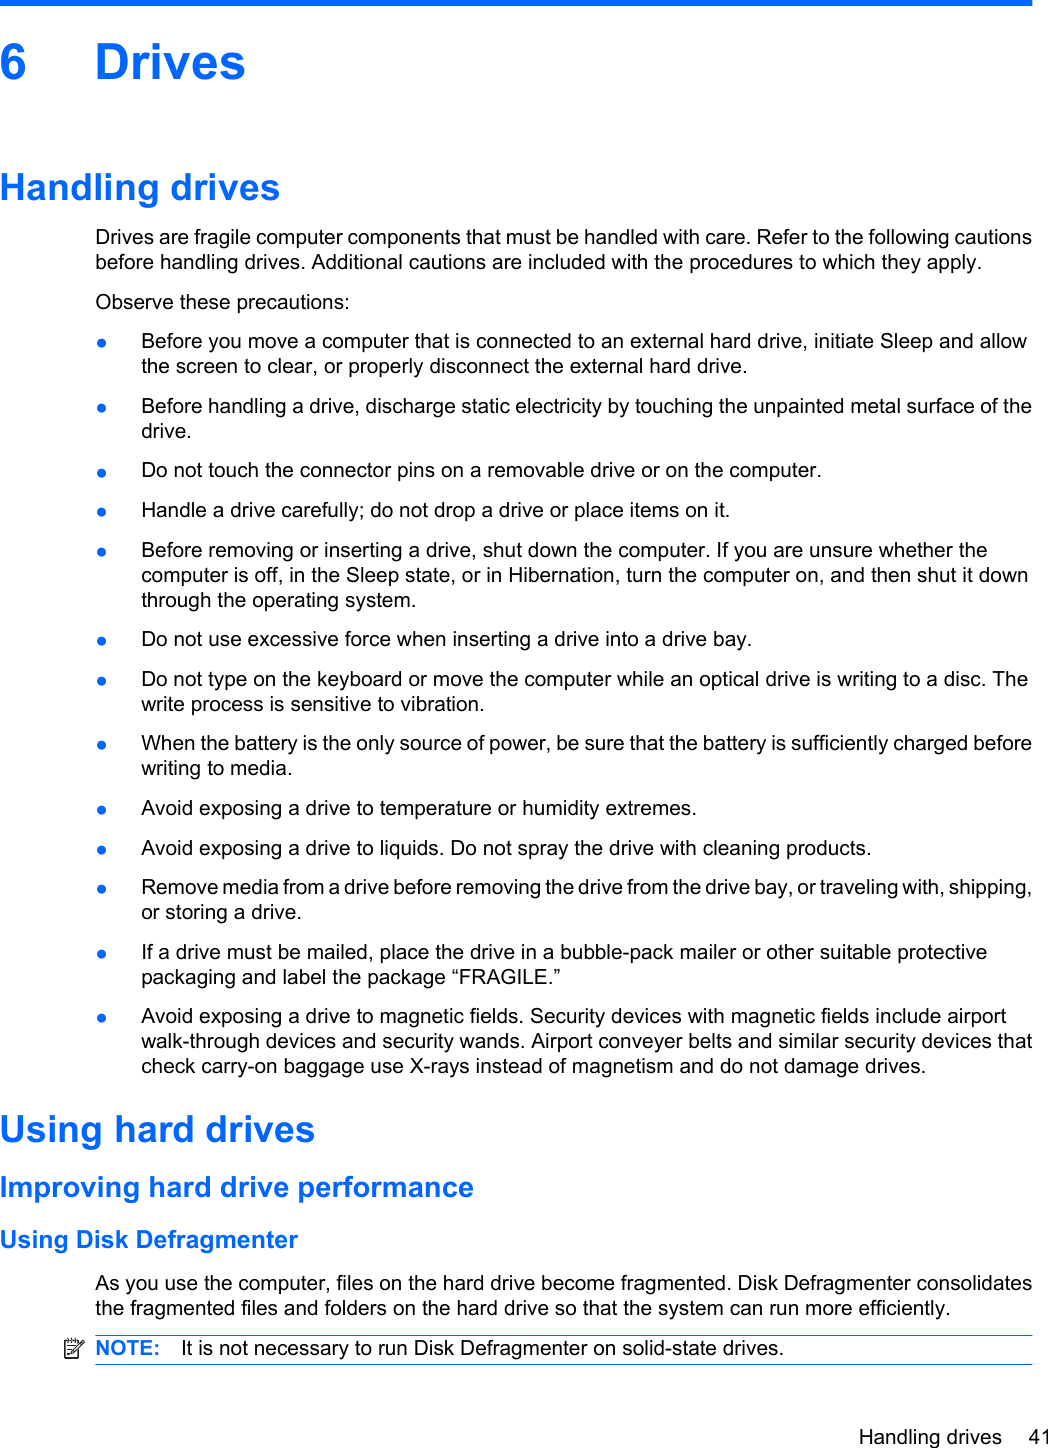 6 DrivesHandling drivesDrives are fragile computer components that must be handled with care. Refer to the following cautionsbefore handling drives. Additional cautions are included with the procedures to which they apply.Observe these precautions:●Before you move a computer that is connected to an external hard drive, initiate Sleep and allowthe screen to clear, or properly disconnect the external hard drive.●Before handling a drive, discharge static electricity by touching the unpainted metal surface of thedrive.●Do not touch the connector pins on a removable drive or on the computer.●Handle a drive carefully; do not drop a drive or place items on it.●Before removing or inserting a drive, shut down the computer. If you are unsure whether thecomputer is off, in the Sleep state, or in Hibernation, turn the computer on, and then shut it downthrough the operating system.●Do not use excessive force when inserting a drive into a drive bay.●Do not type on the keyboard or move the computer while an optical drive is writing to a disc. Thewrite process is sensitive to vibration.●When the battery is the only source of power, be sure that the battery is sufficiently charged beforewriting to media.●Avoid exposing a drive to temperature or humidity extremes.●Avoid exposing a drive to liquids. Do not spray the drive with cleaning products.●Remove media from a drive before removing the drive from the drive bay, or traveling with, shipping,or storing a drive.●If a drive must be mailed, place the drive in a bubble-pack mailer or other suitable protectivepackaging and label the package “FRAGILE.”●Avoid exposing a drive to magnetic fields. Security devices with magnetic fields include airportwalk-through devices and security wands. Airport conveyer belts and similar security devices thatcheck carry-on baggage use X-rays instead of magnetism and do not damage drives.Using hard drivesImproving hard drive performanceUsing Disk DefragmenterAs you use the computer, files on the hard drive become fragmented. Disk Defragmenter consolidatesthe fragmented files and folders on the hard drive so that the system can run more efficiently.NOTE: It is not necessary to run Disk Defragmenter on solid-state drives.Handling drives 41